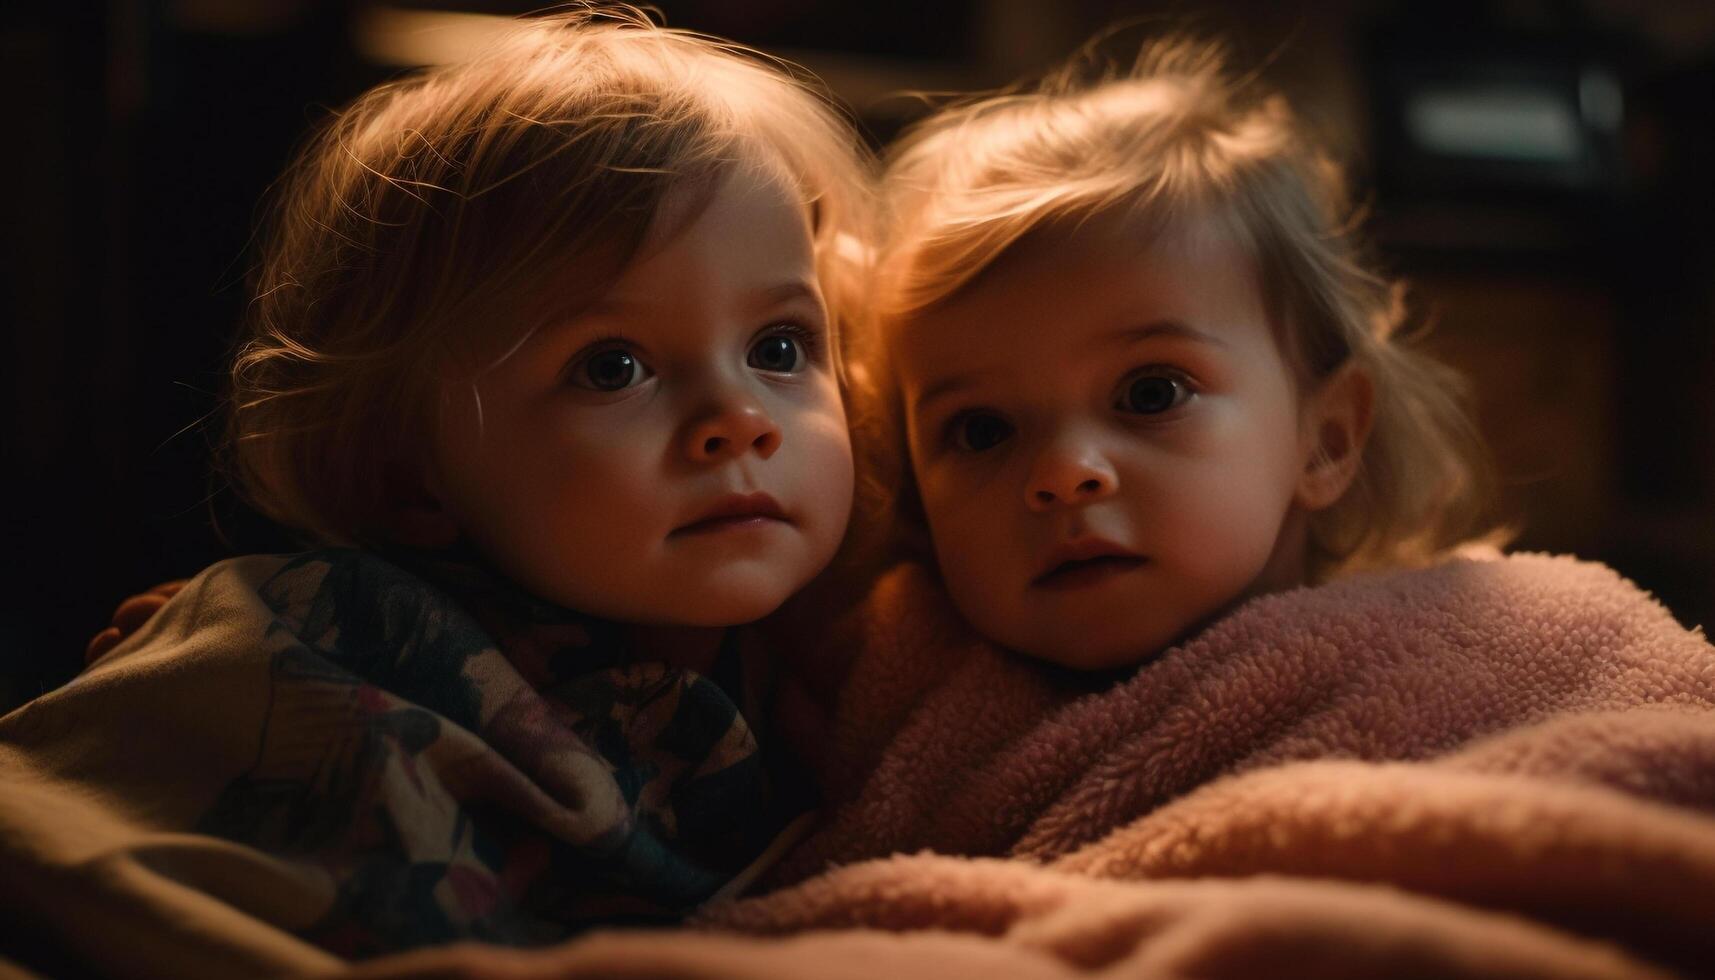 Two cute baby girls smiling, embracing, and looking at camera generated by AI photo